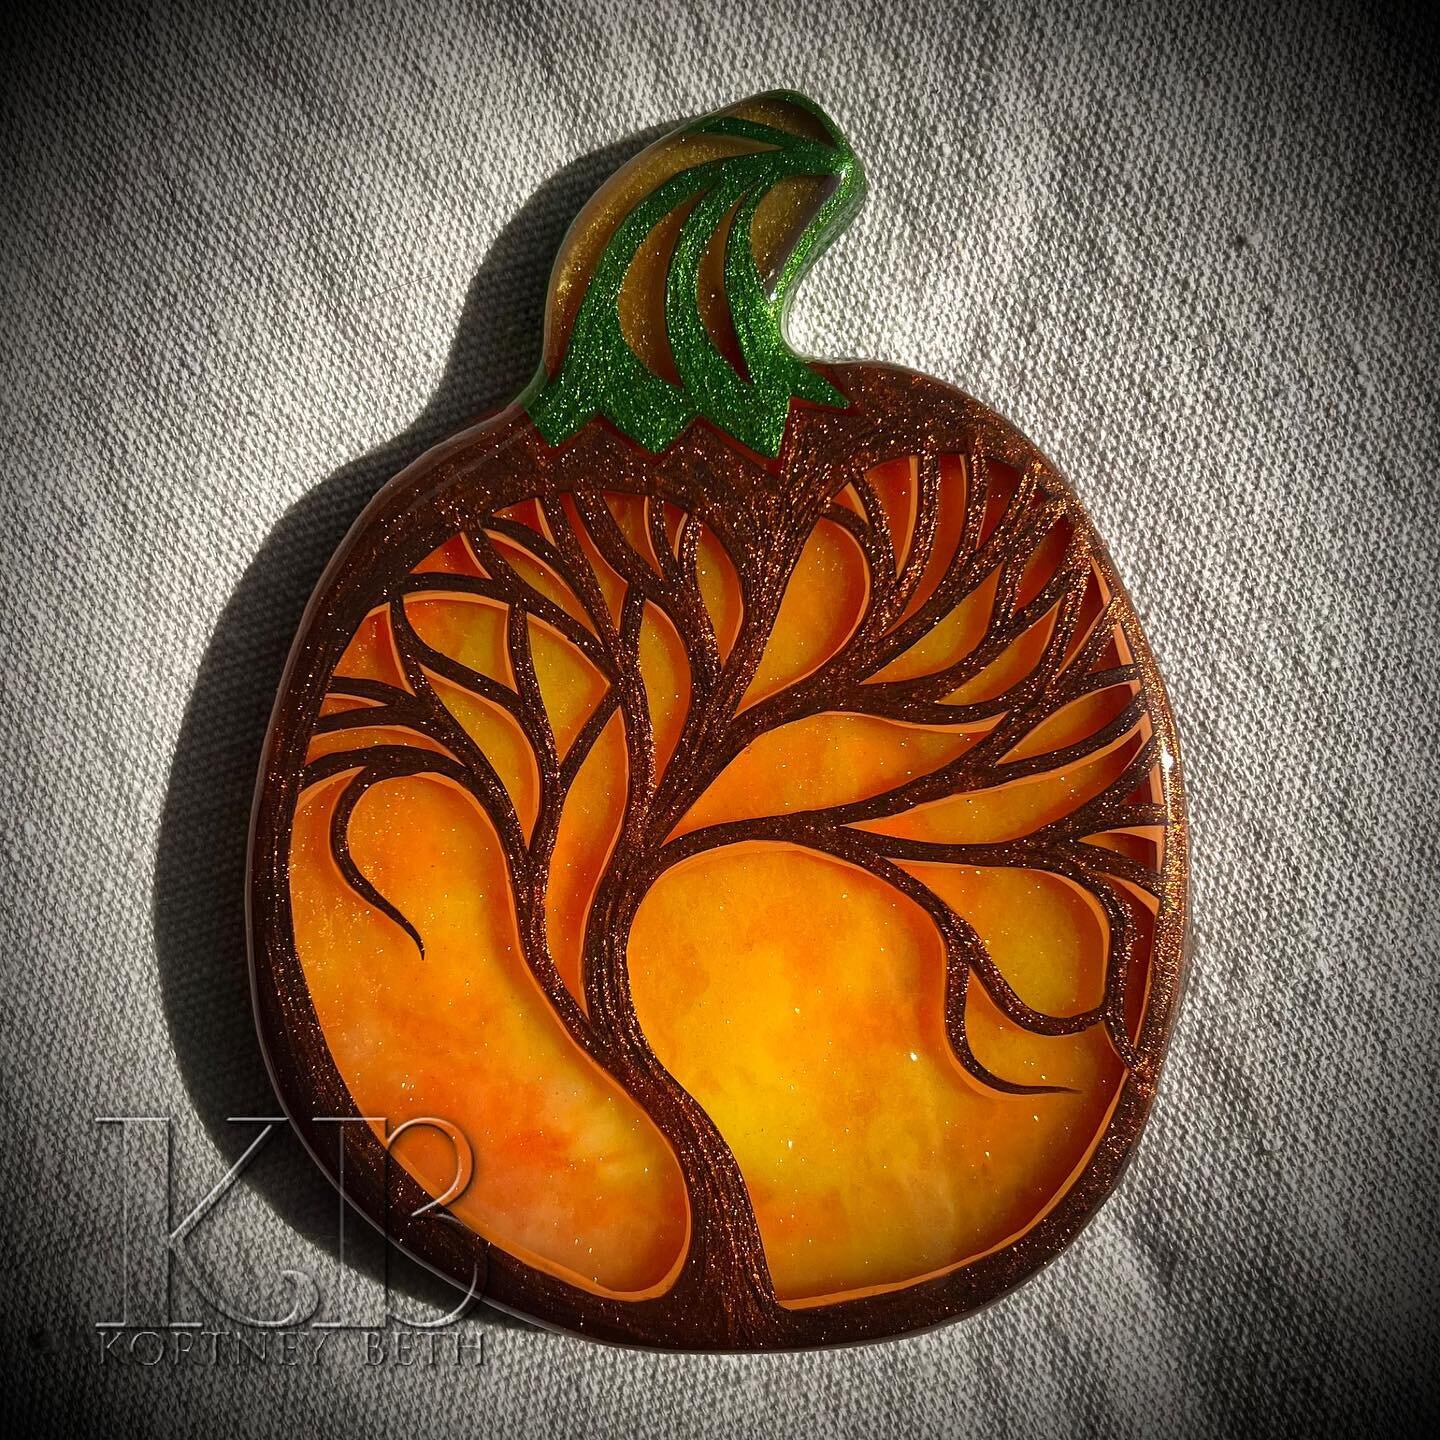 I made 3 of these resin pumpkins and they were quite fun. There are five layers of resin to create the depth of the carved look, and that sparkling shimmer is so perfect! 🎃💕
 &ldquo;Pumpkin Shimmer&rdquo;
Resin &amp; Acrylic 
6&rdquo; x 4.5&rdquo; 